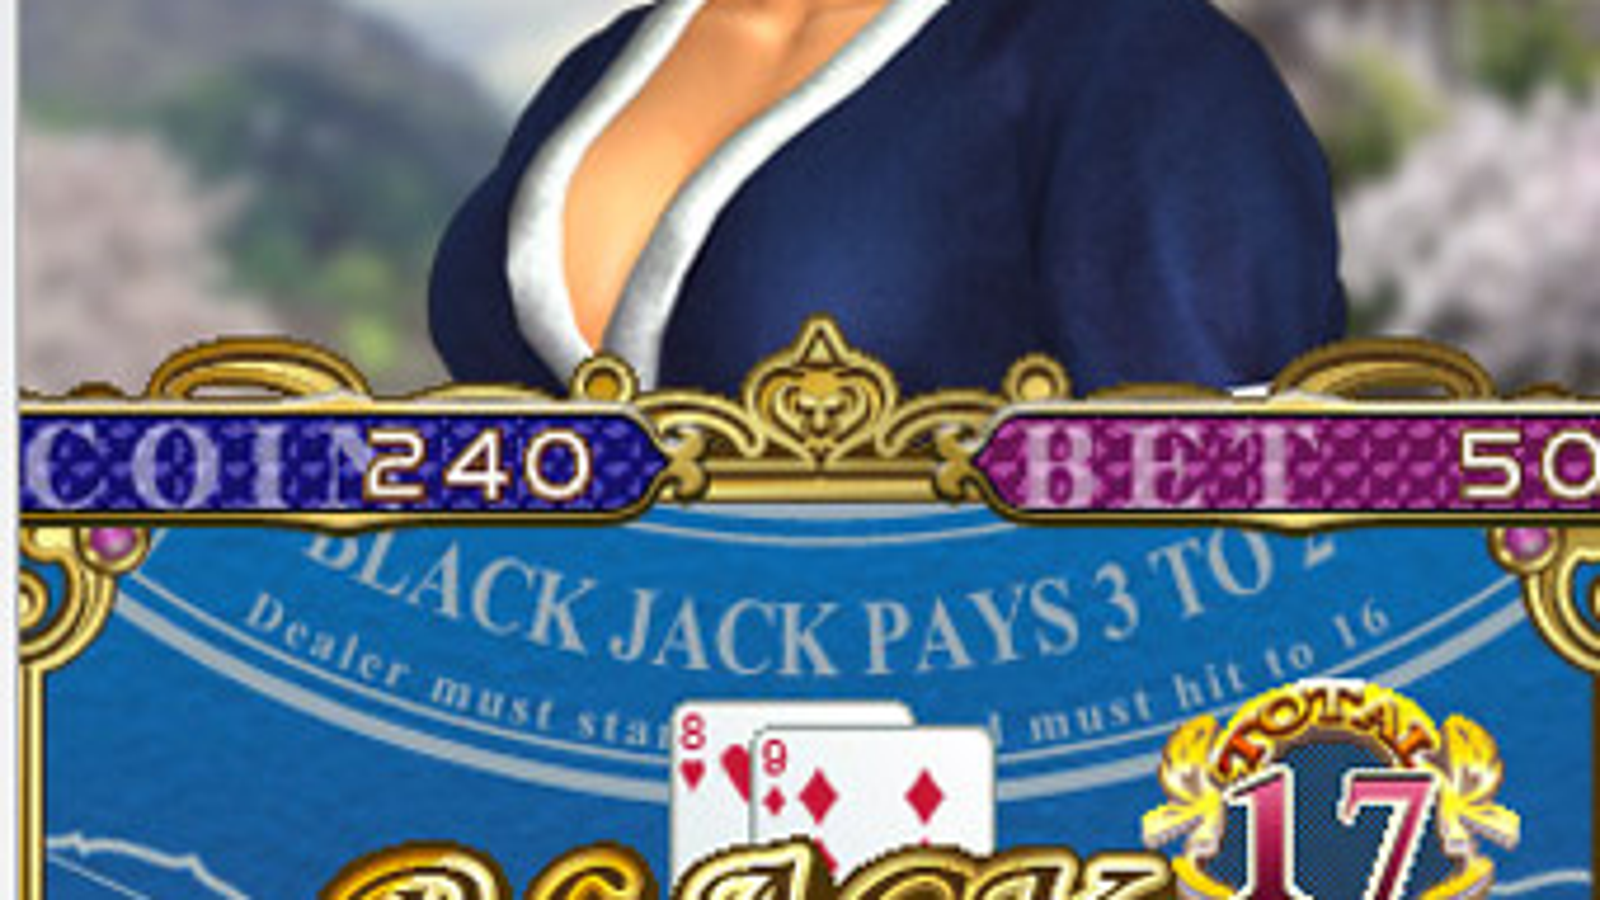 instal the new version for iphoneBlackjack Professional